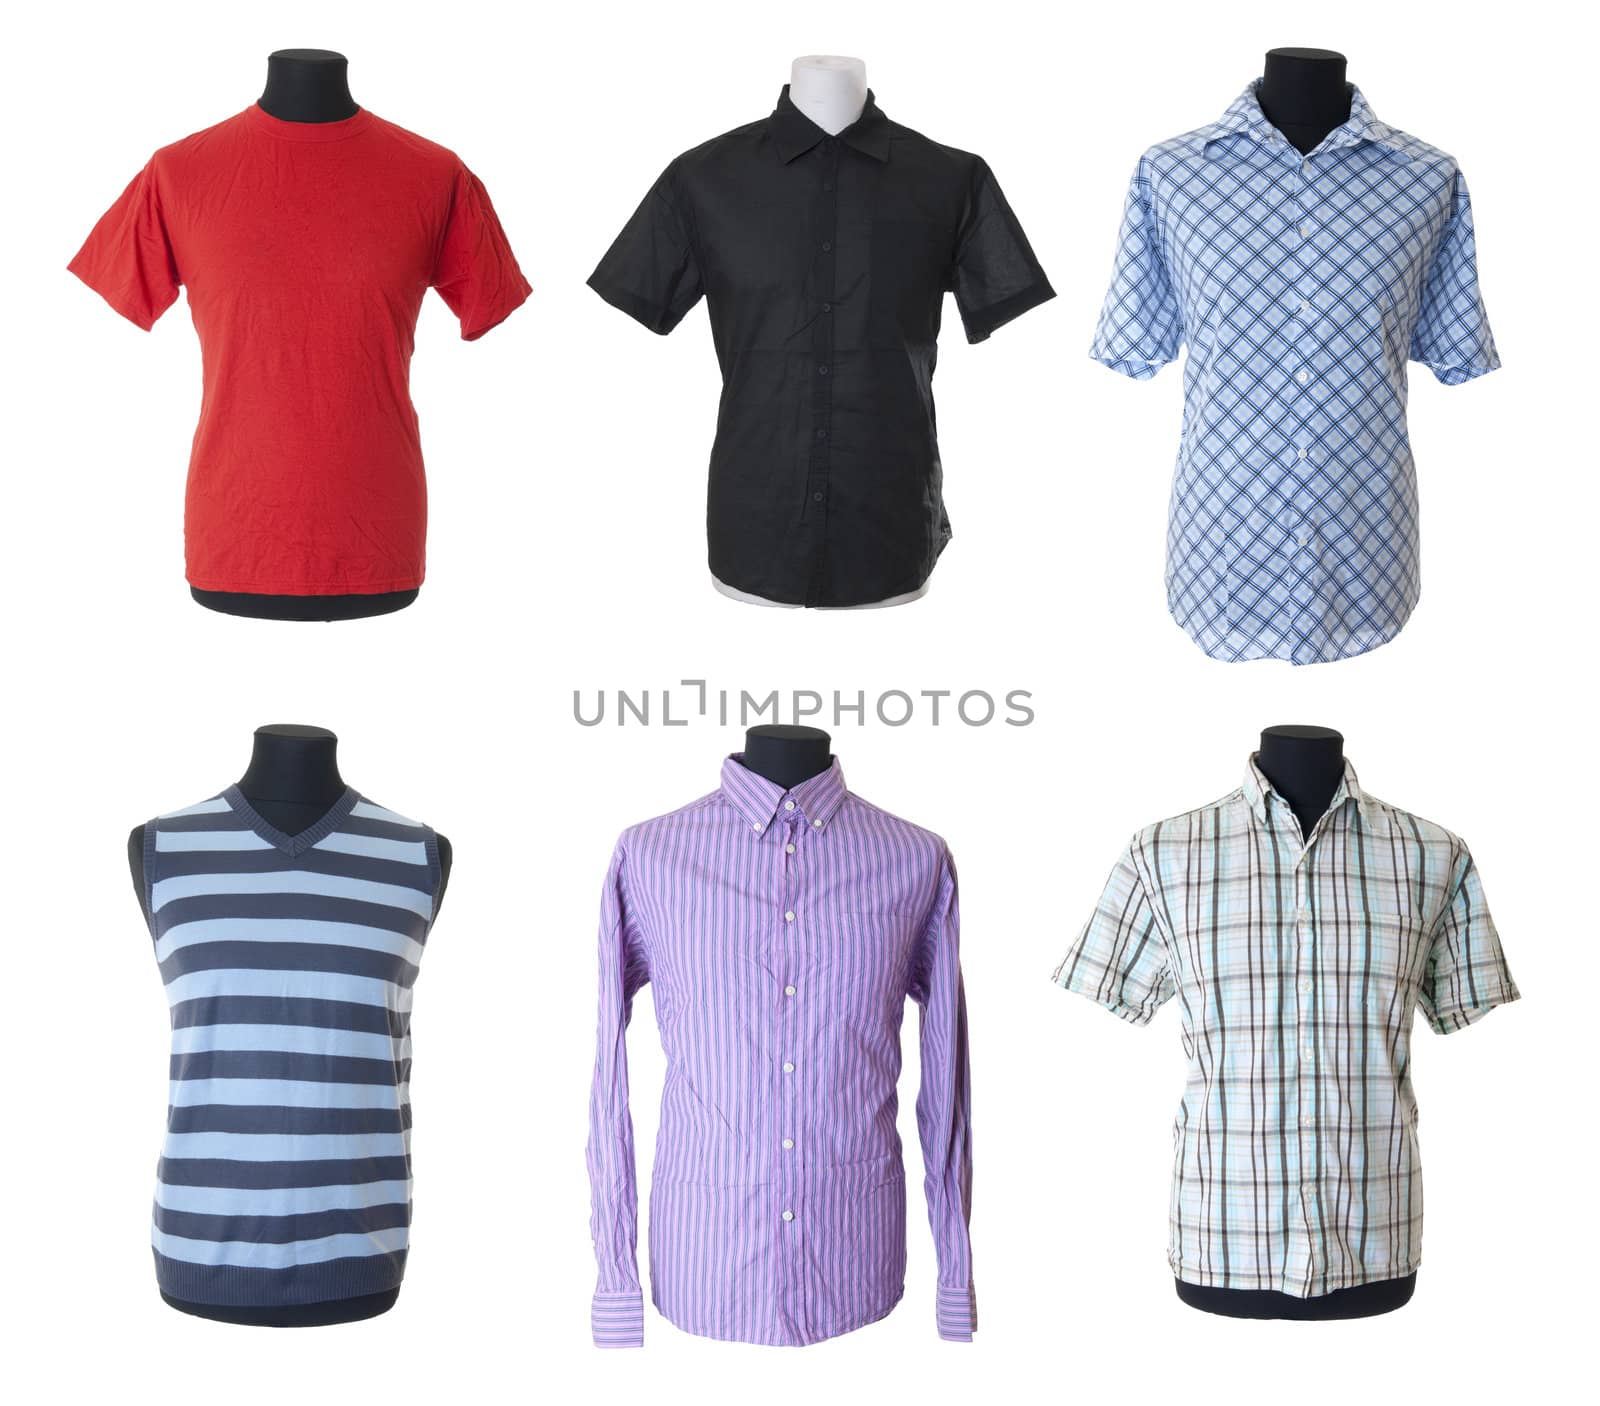 6 male clothes with short and long sleeves on mannequin torso. Isolated on white background